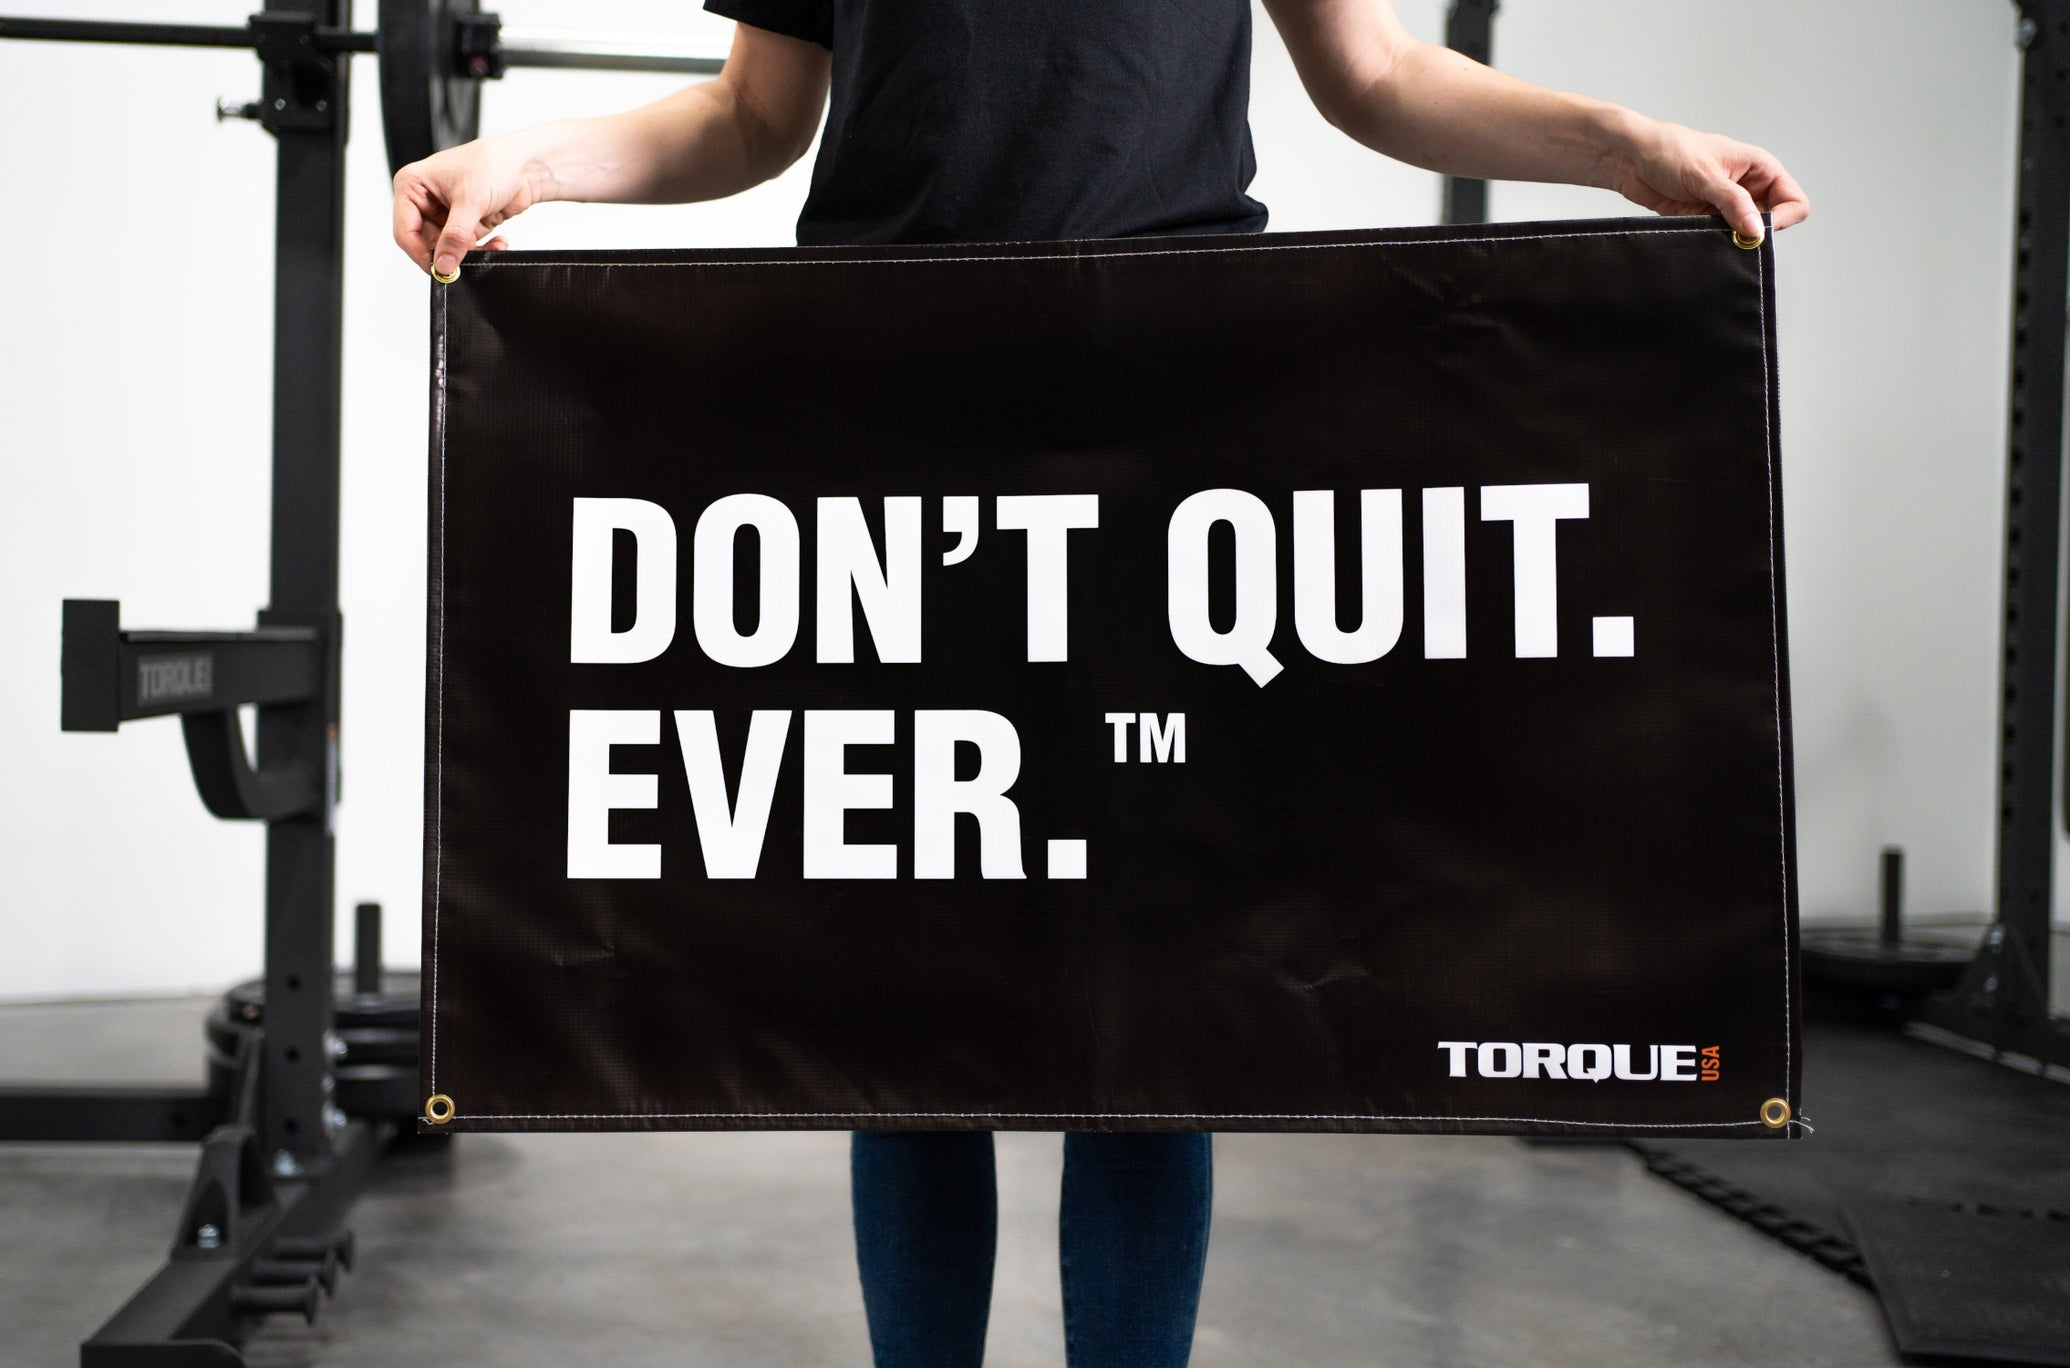 Torque Fitness Gym Banner Inspirational Message Slogan Don't Quit. Ever.